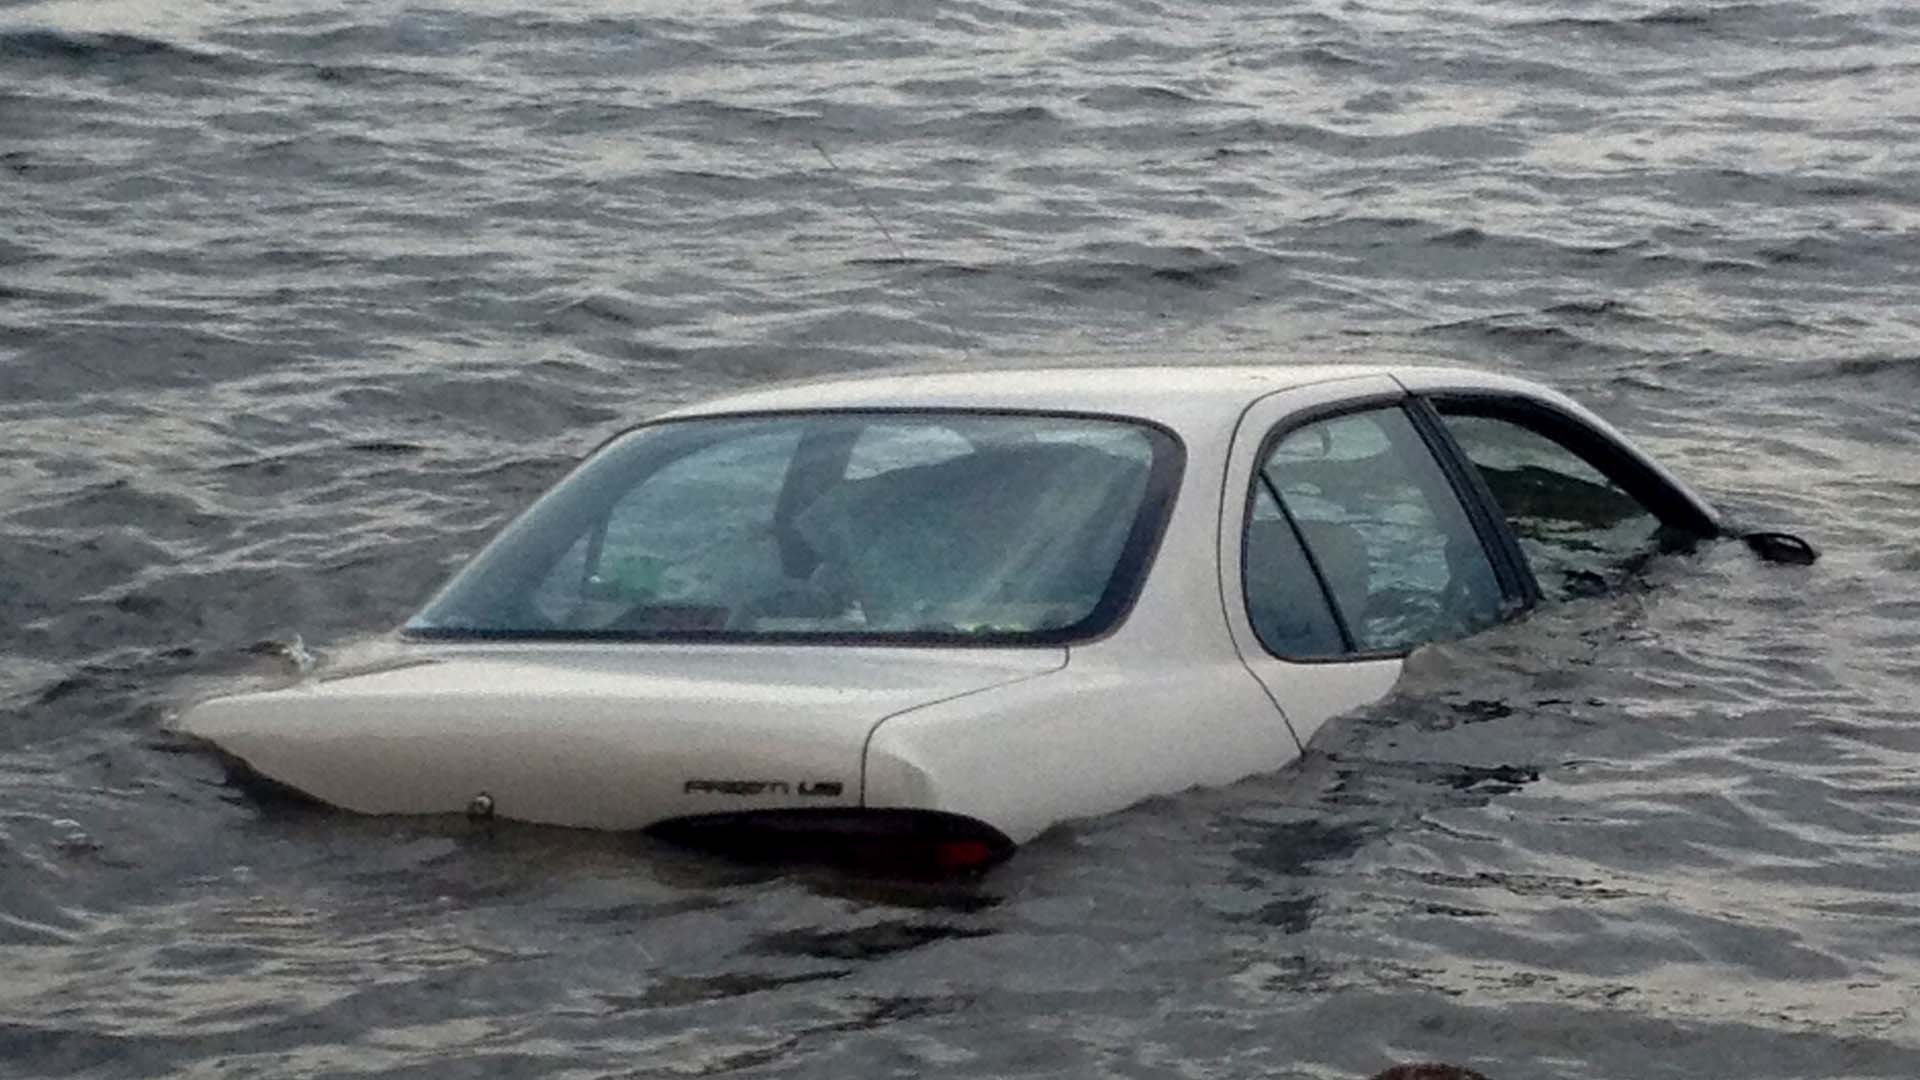 dangerous survival myths - If you go into a lake when in a car don’t wait until the car fills with water, just open the window and get out ASAP.